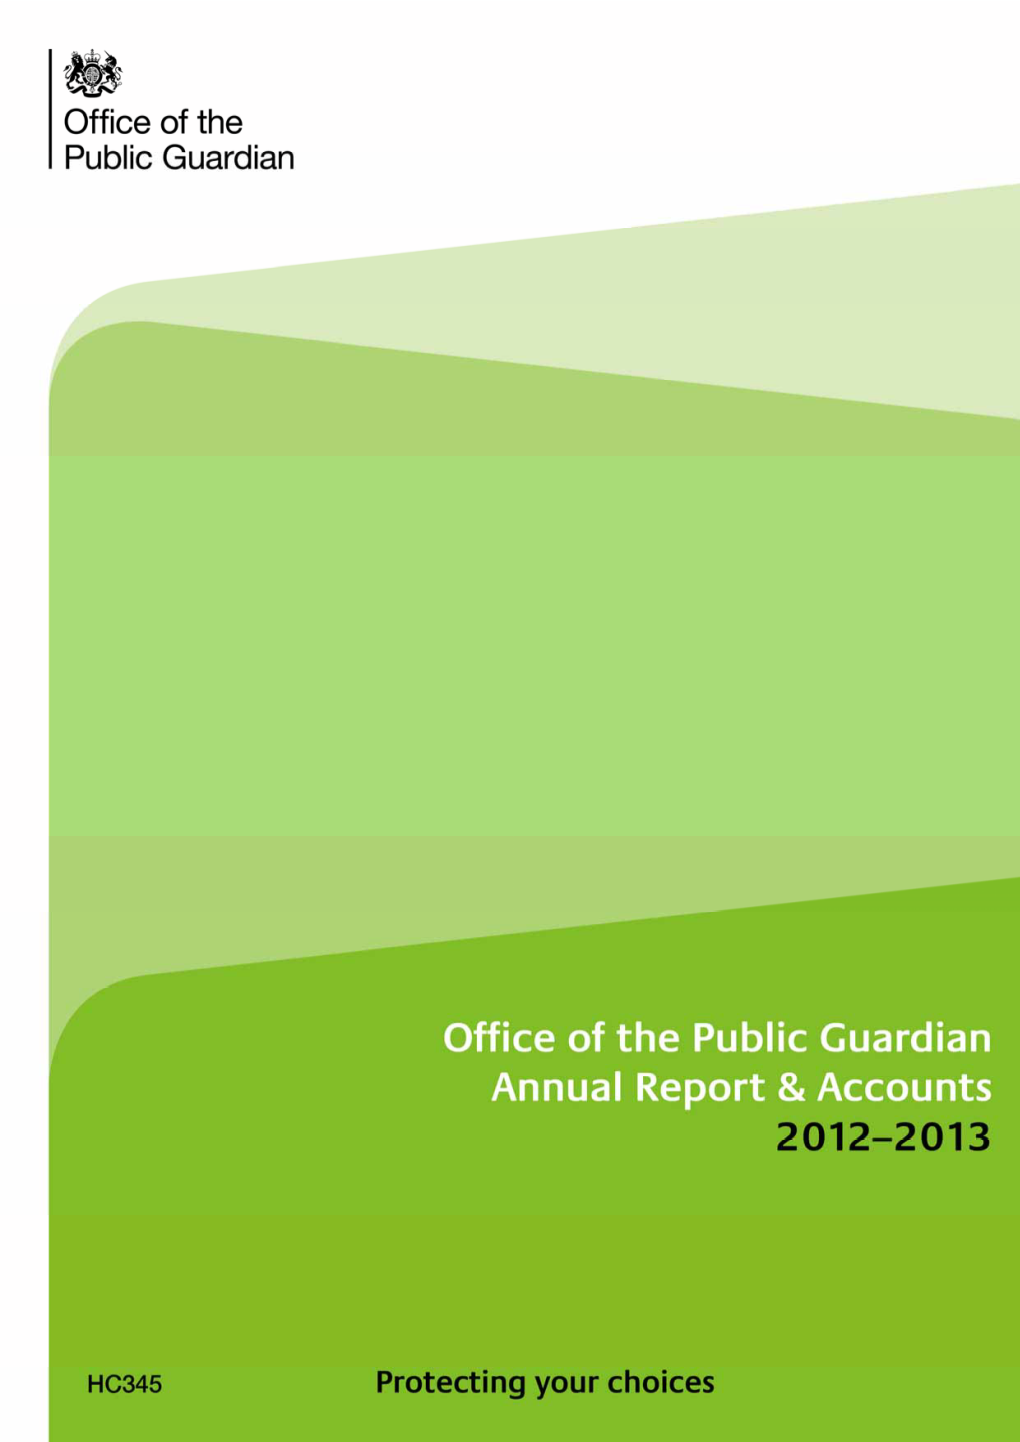 OPG Annual Report & Accounts 2012-2013